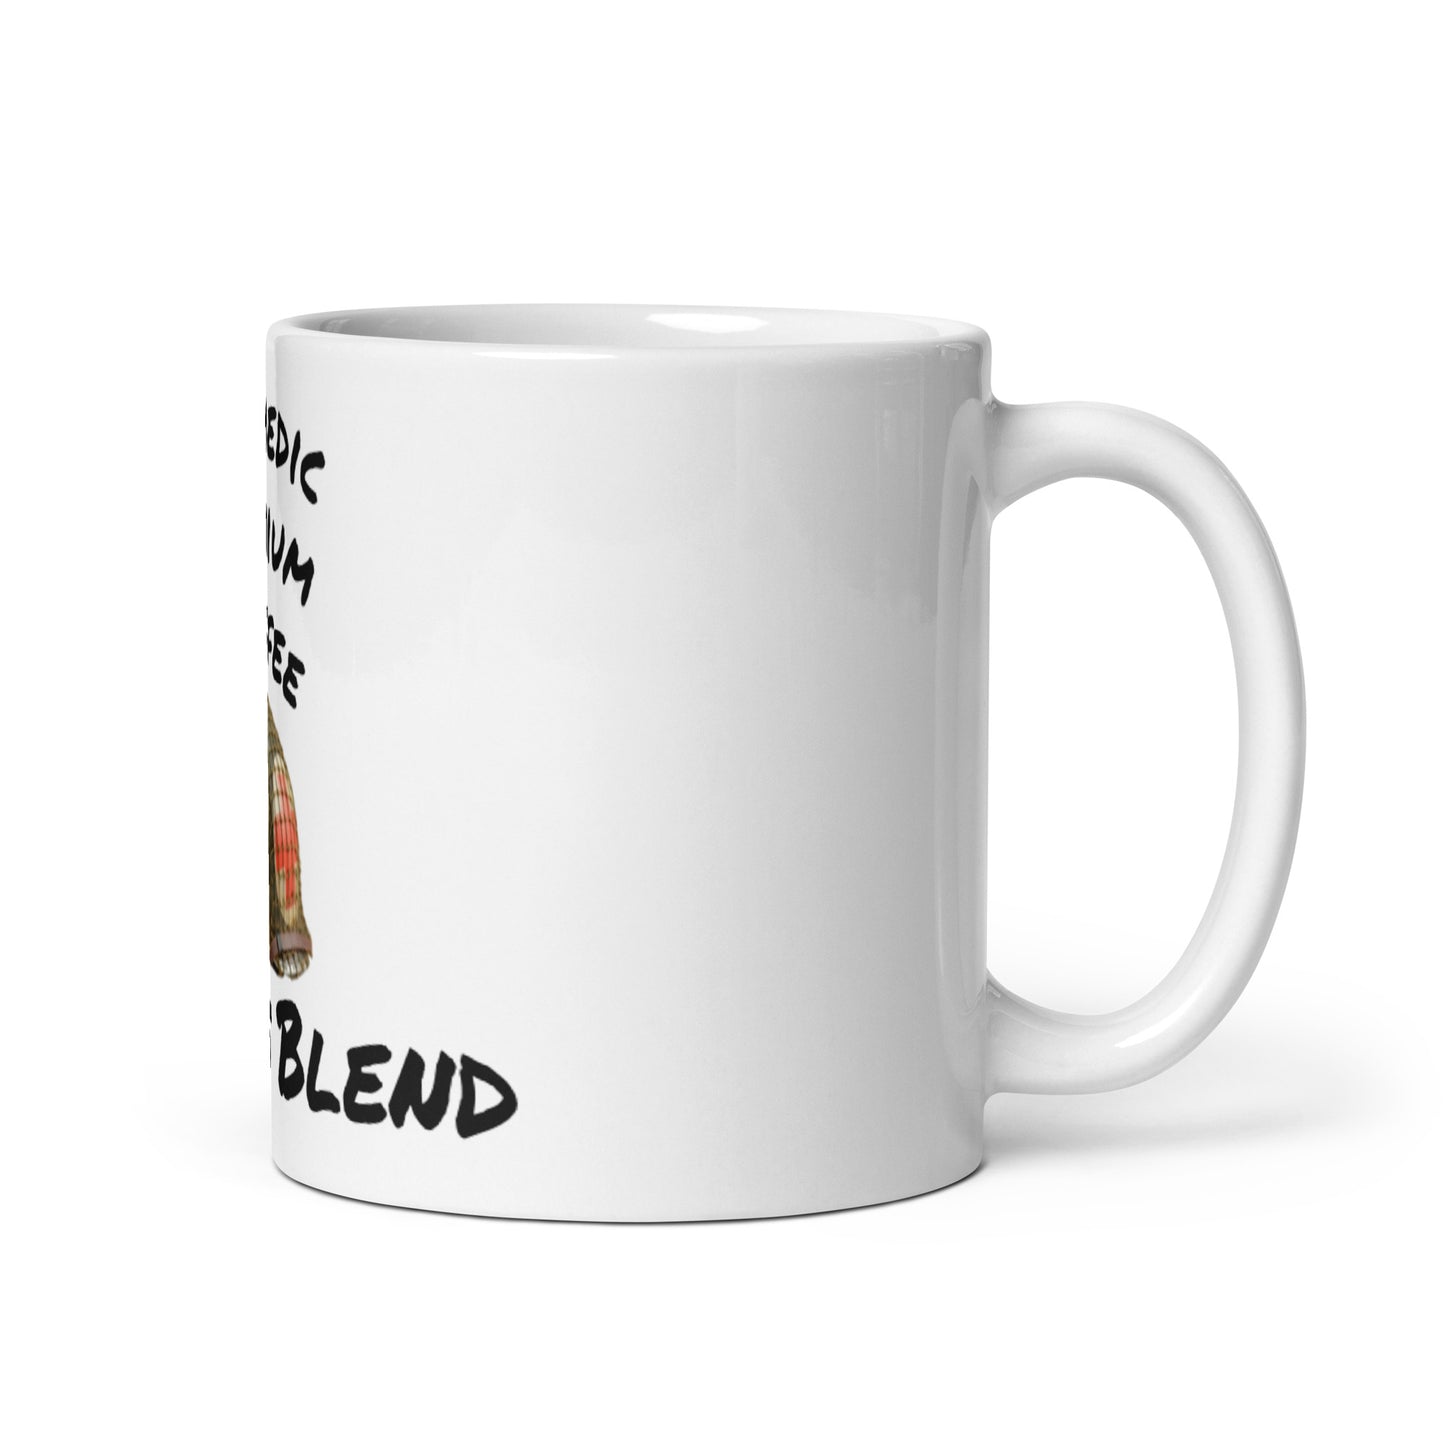 Patch's Blend Coffee Cup